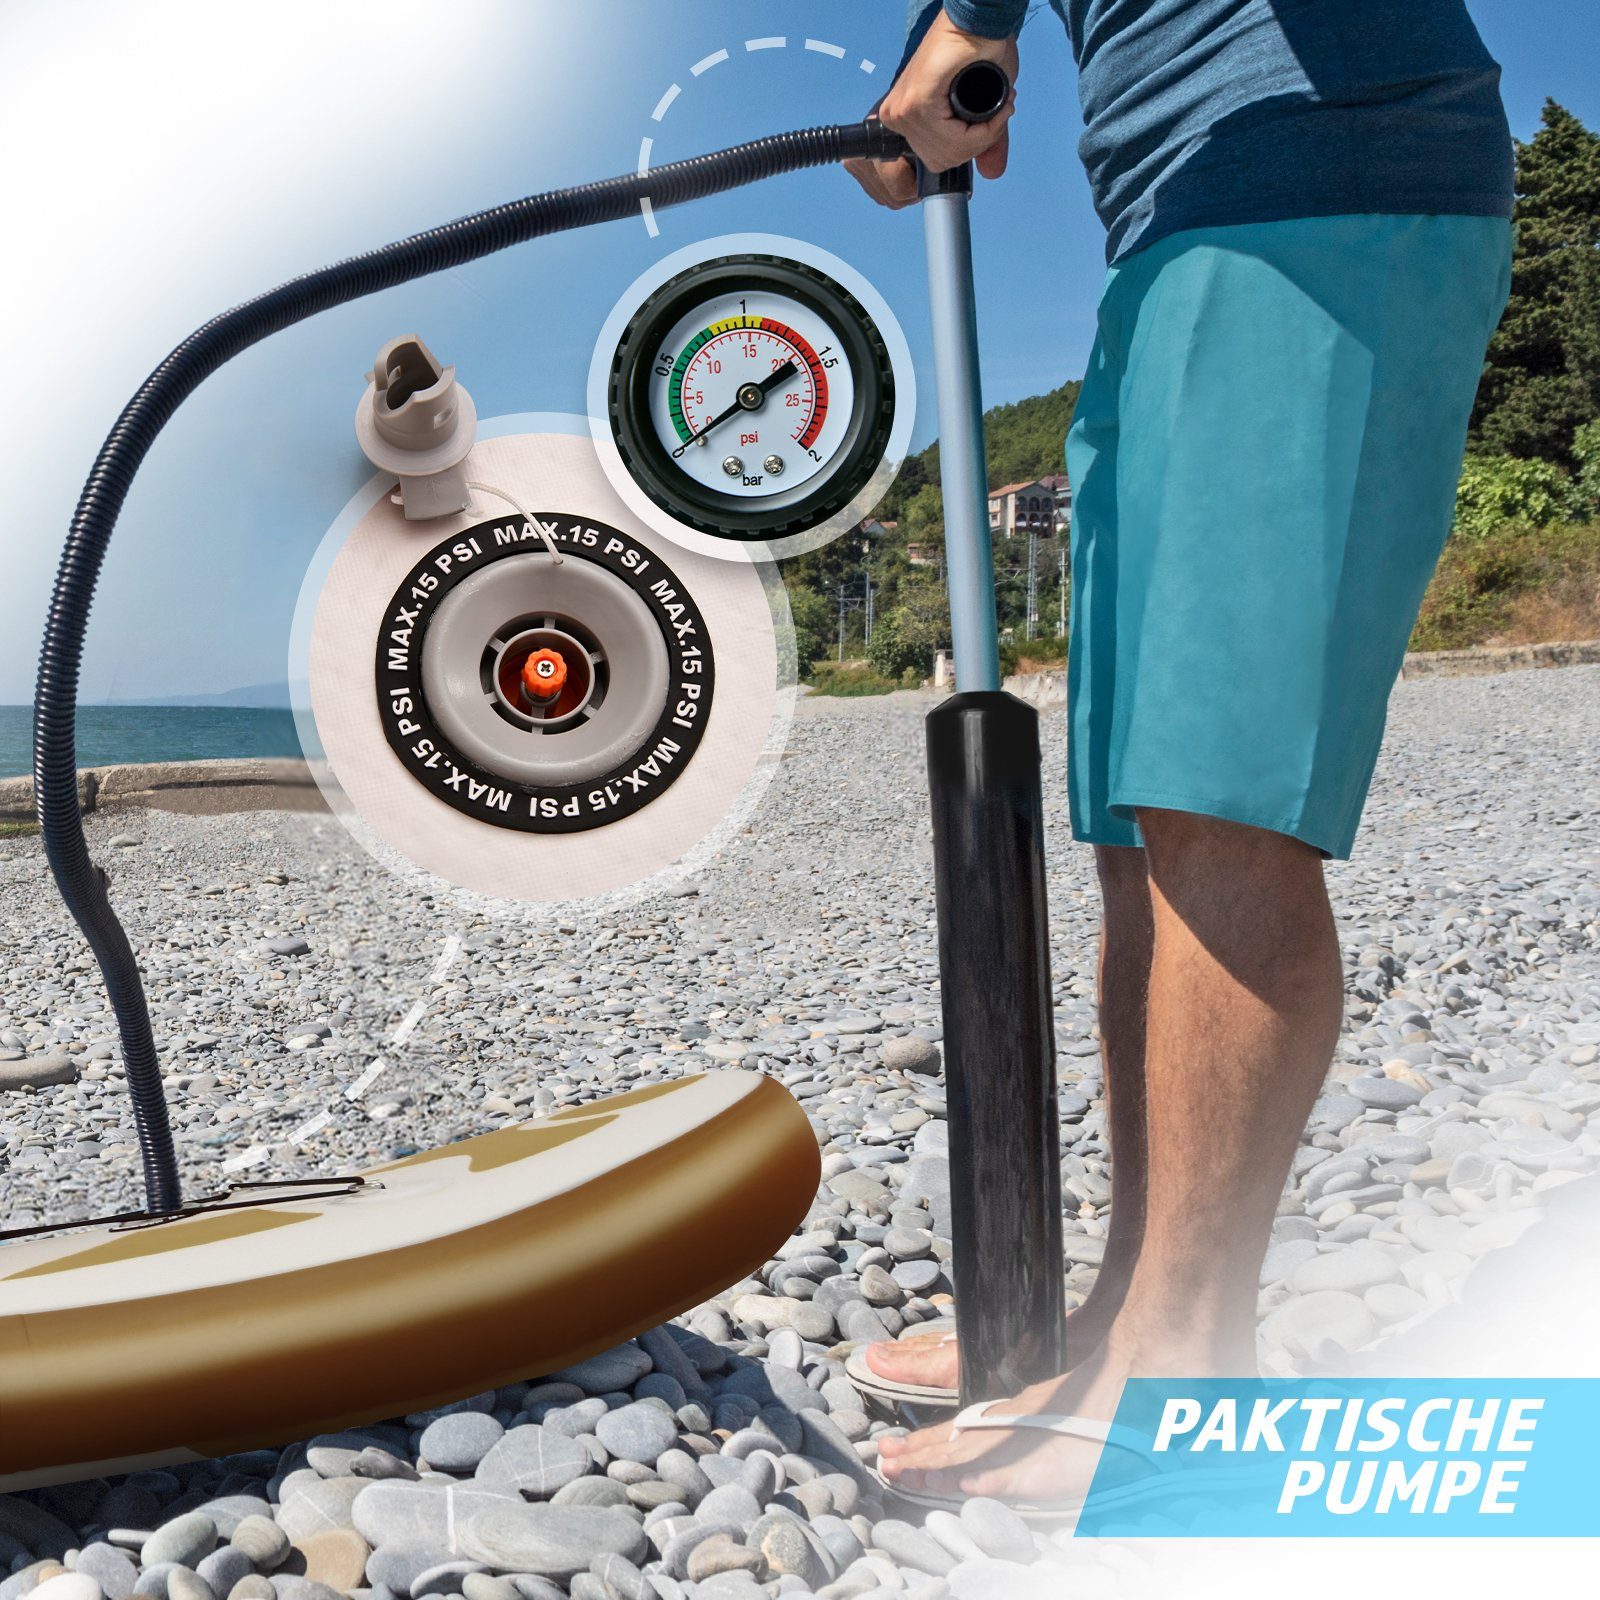 Physionics SUP-Board Stand Up Paddle SUP Bastet(Gold) 305cm Aufblasbares Board Board